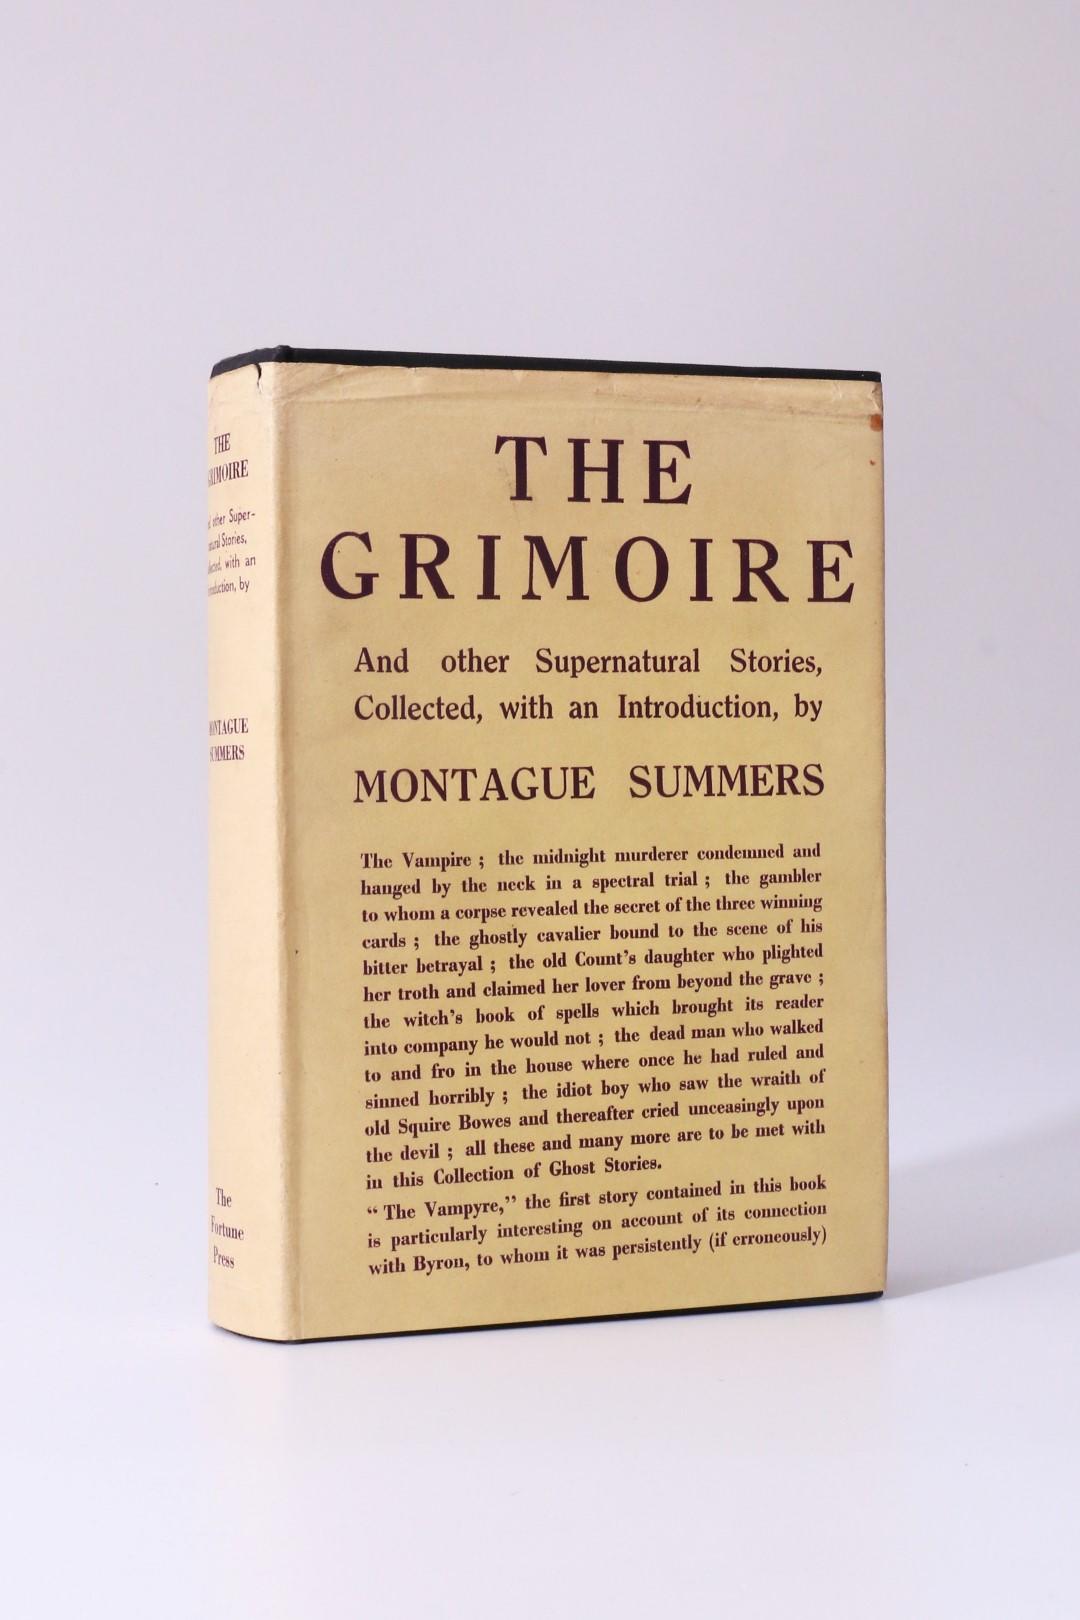 Various [ed. Montague Summers] including Polidori, Le Fanu and Maturin - The Grimoire and other Supernatural Stories, Collected, with an Introduction by Montague Summers - The Fortune Press, n.d. [1936], First Edition.